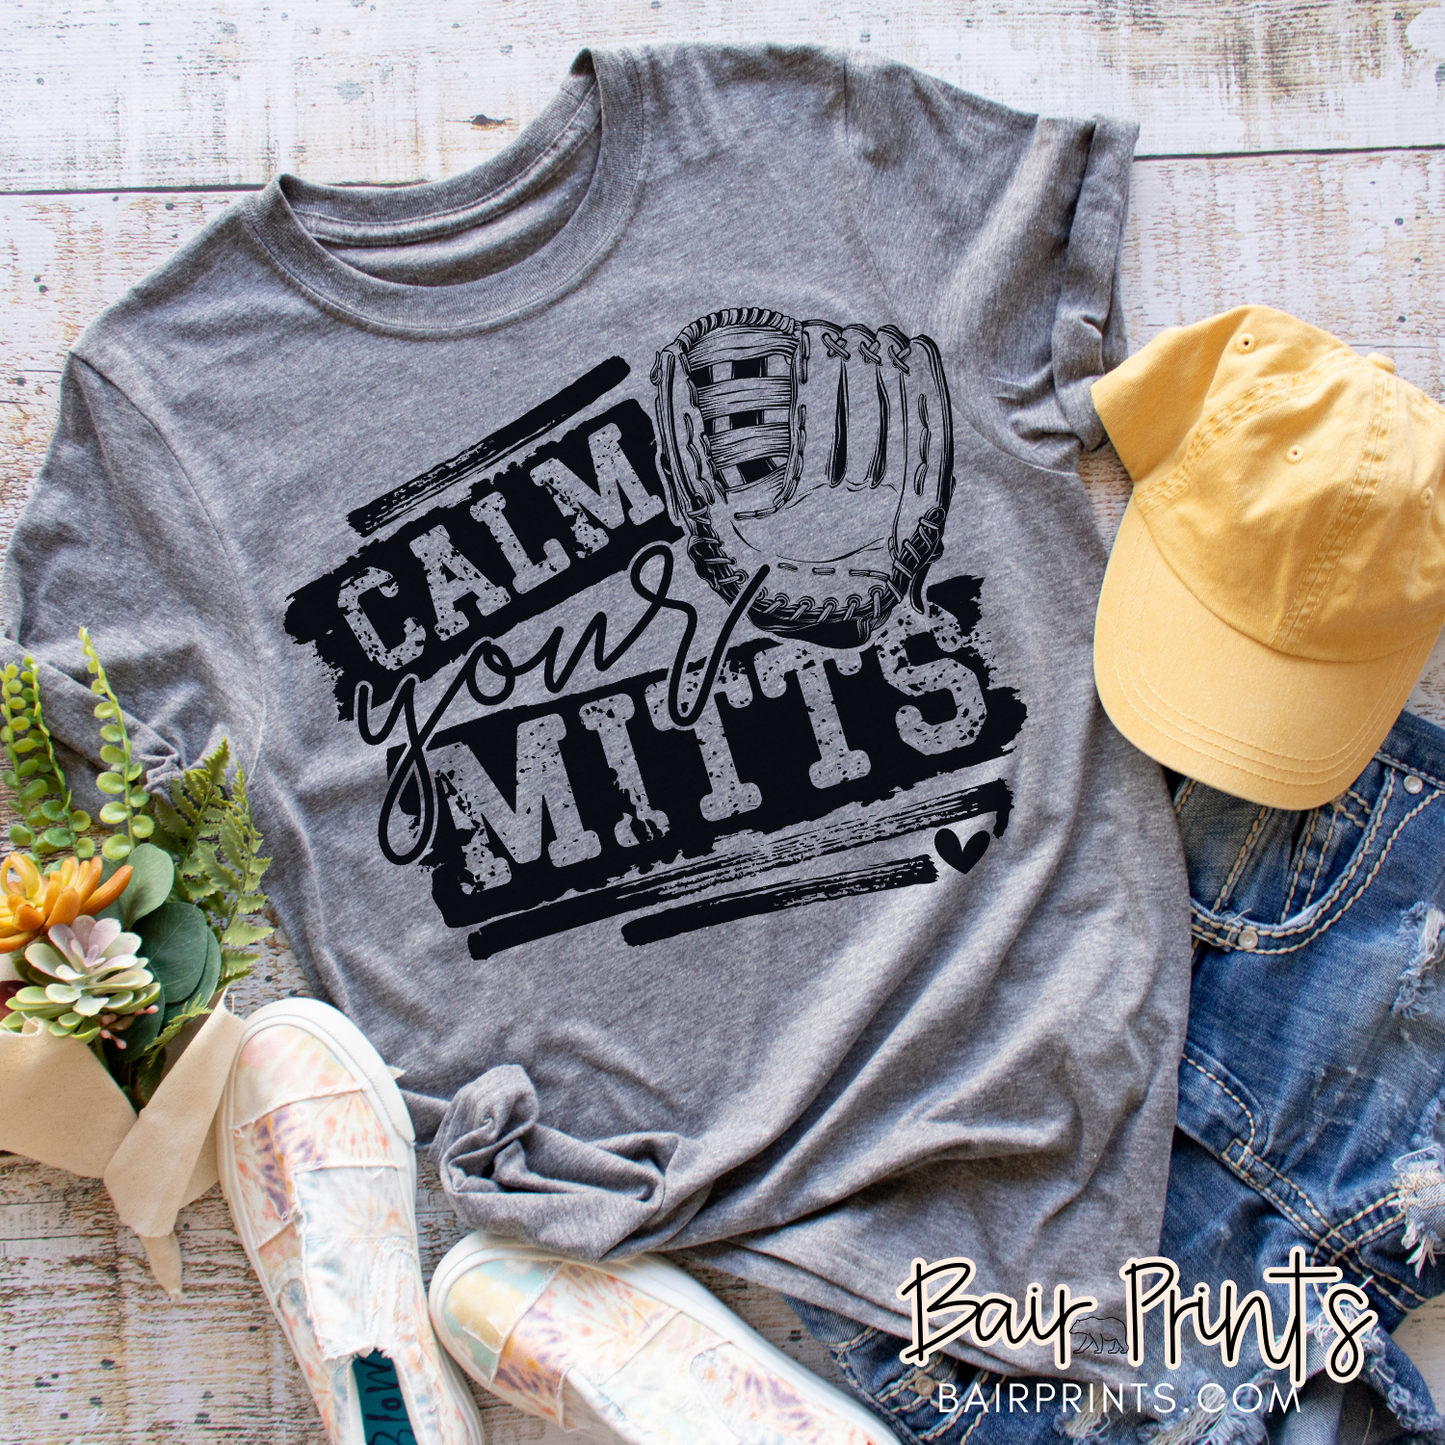 Calm Your Mitts Tee Shirt.